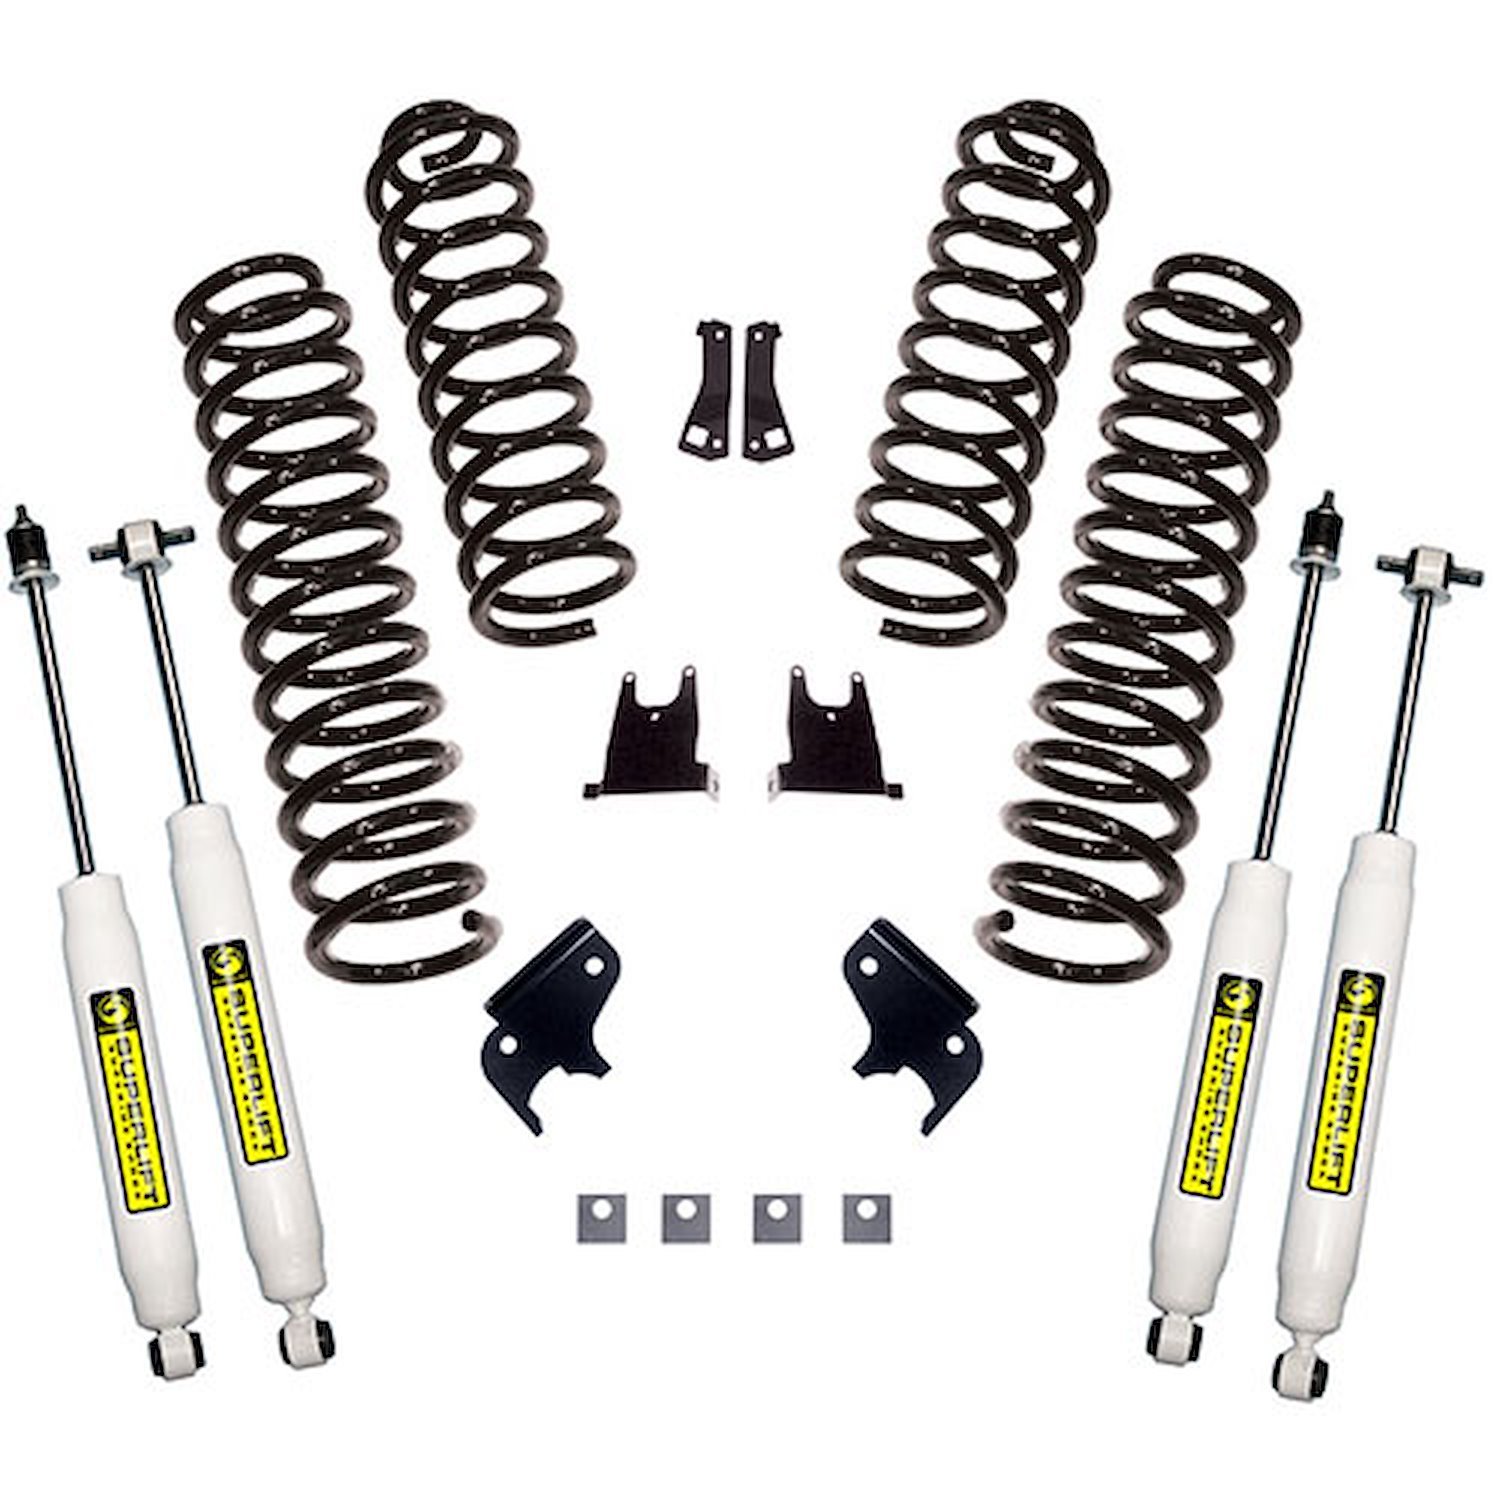 K932 Front and Rear Suspension Lift Kit, Lift Amount: 2.5 in. Front/2.5 in. Rear